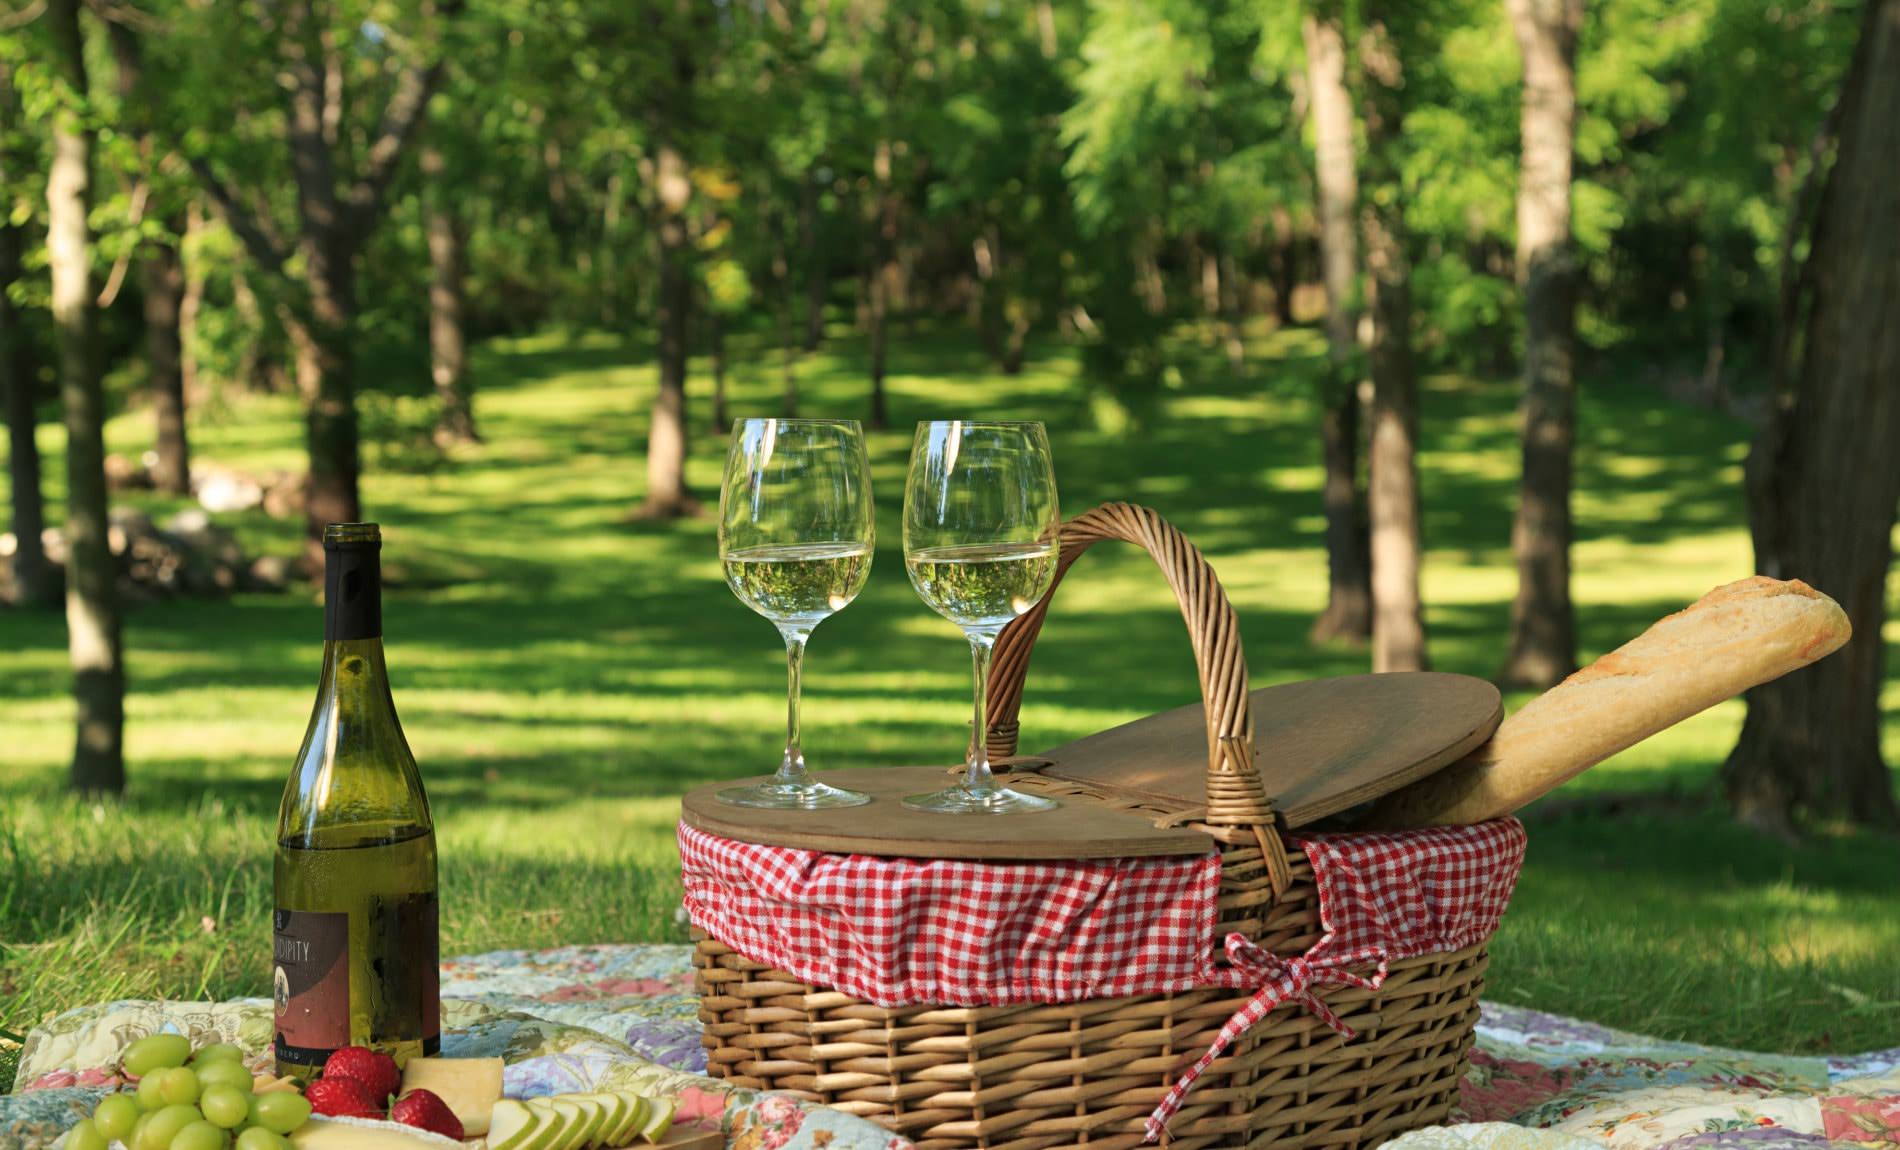 Picnic basket on a quilt with fresh fruit, cheese and wine surrounded by green grass and trees